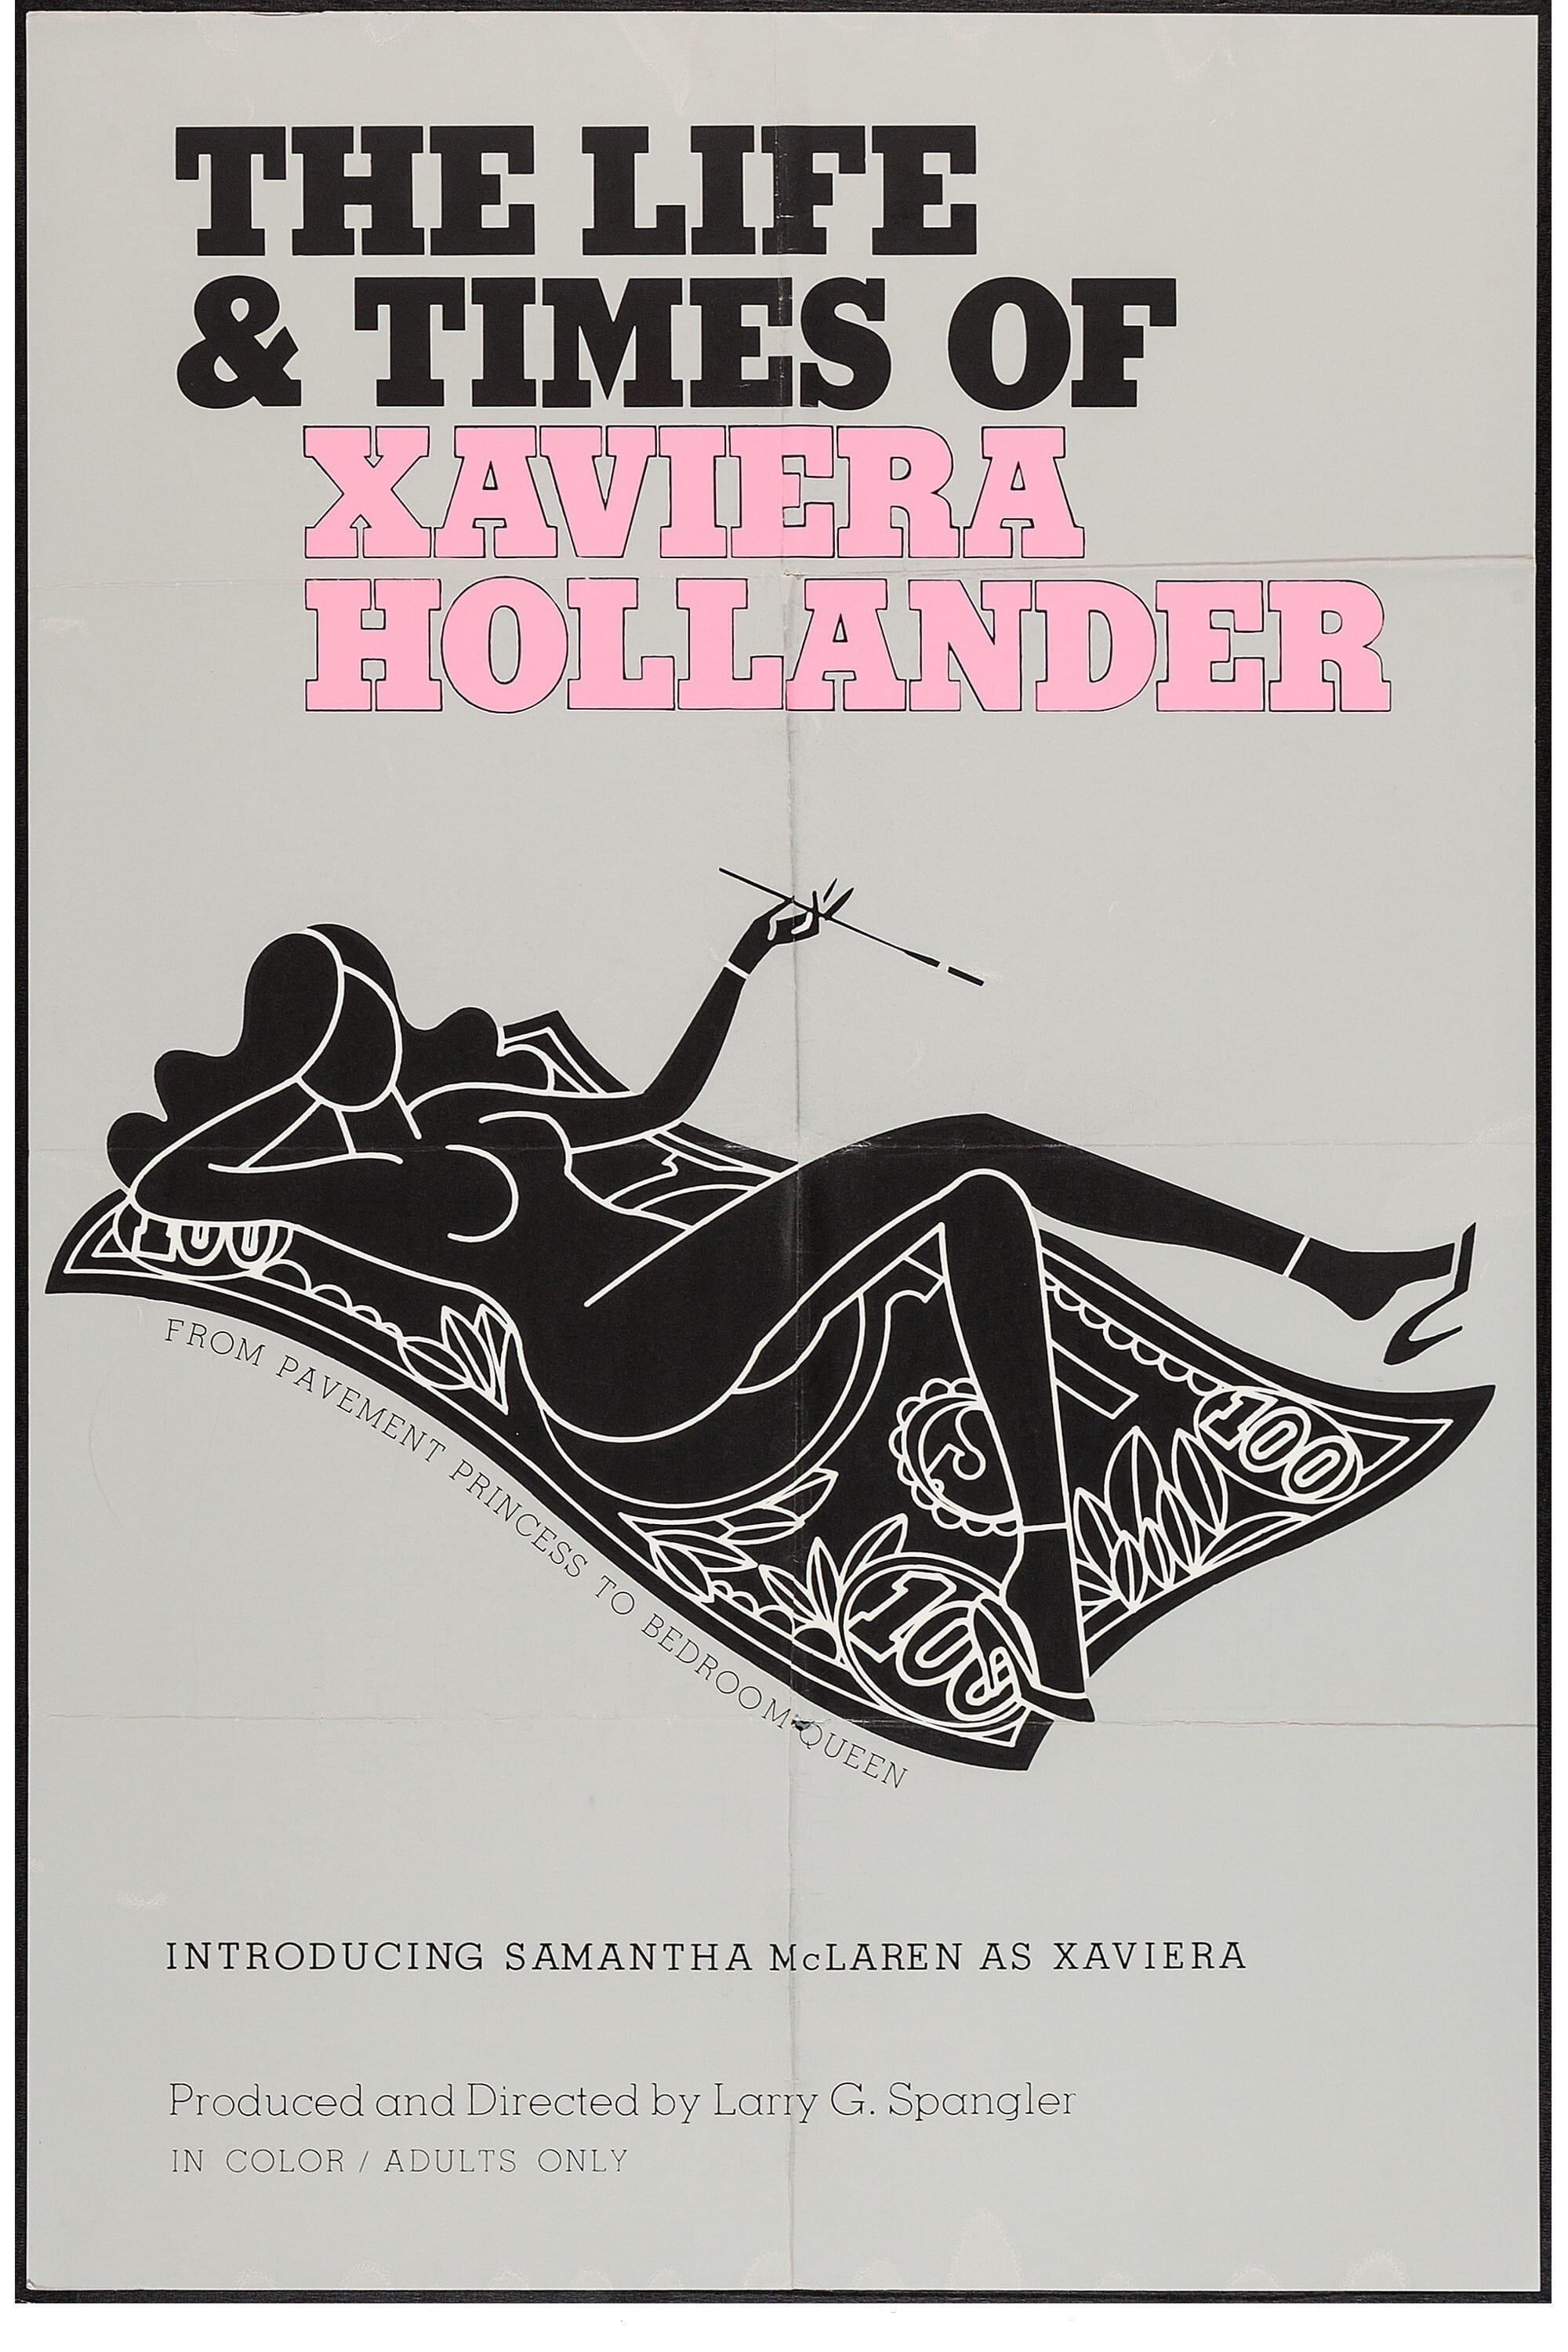 The Life & Times of Xaviera Hollander poster